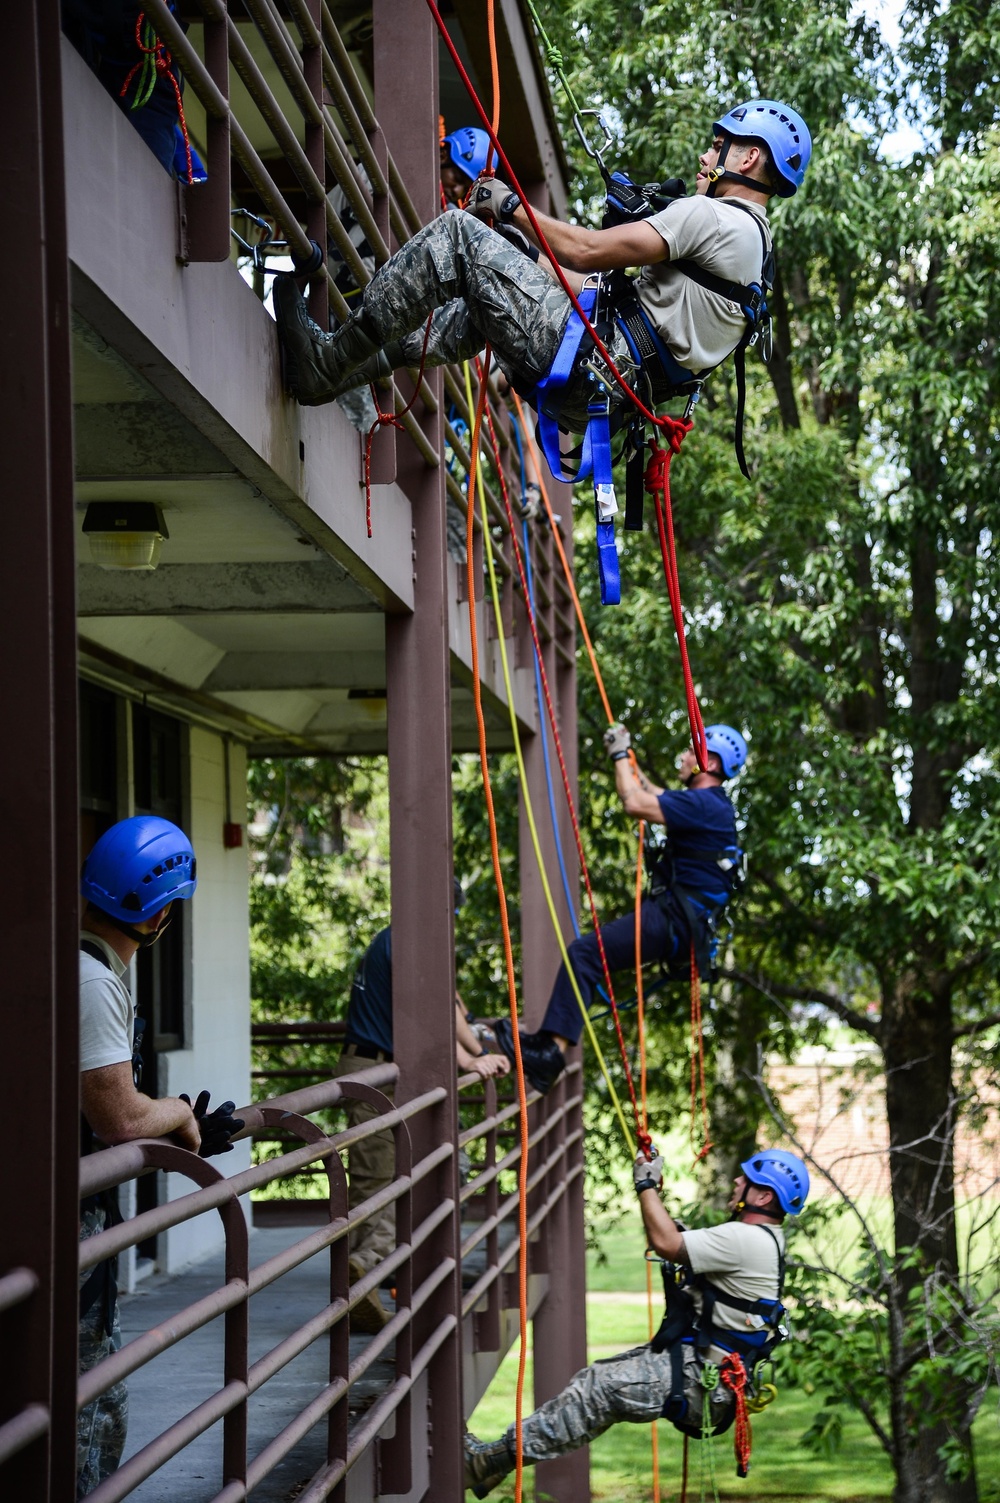 DVIDS - Images - Air Force firefighters receive high angle rescue training  [Image 5 of 5]